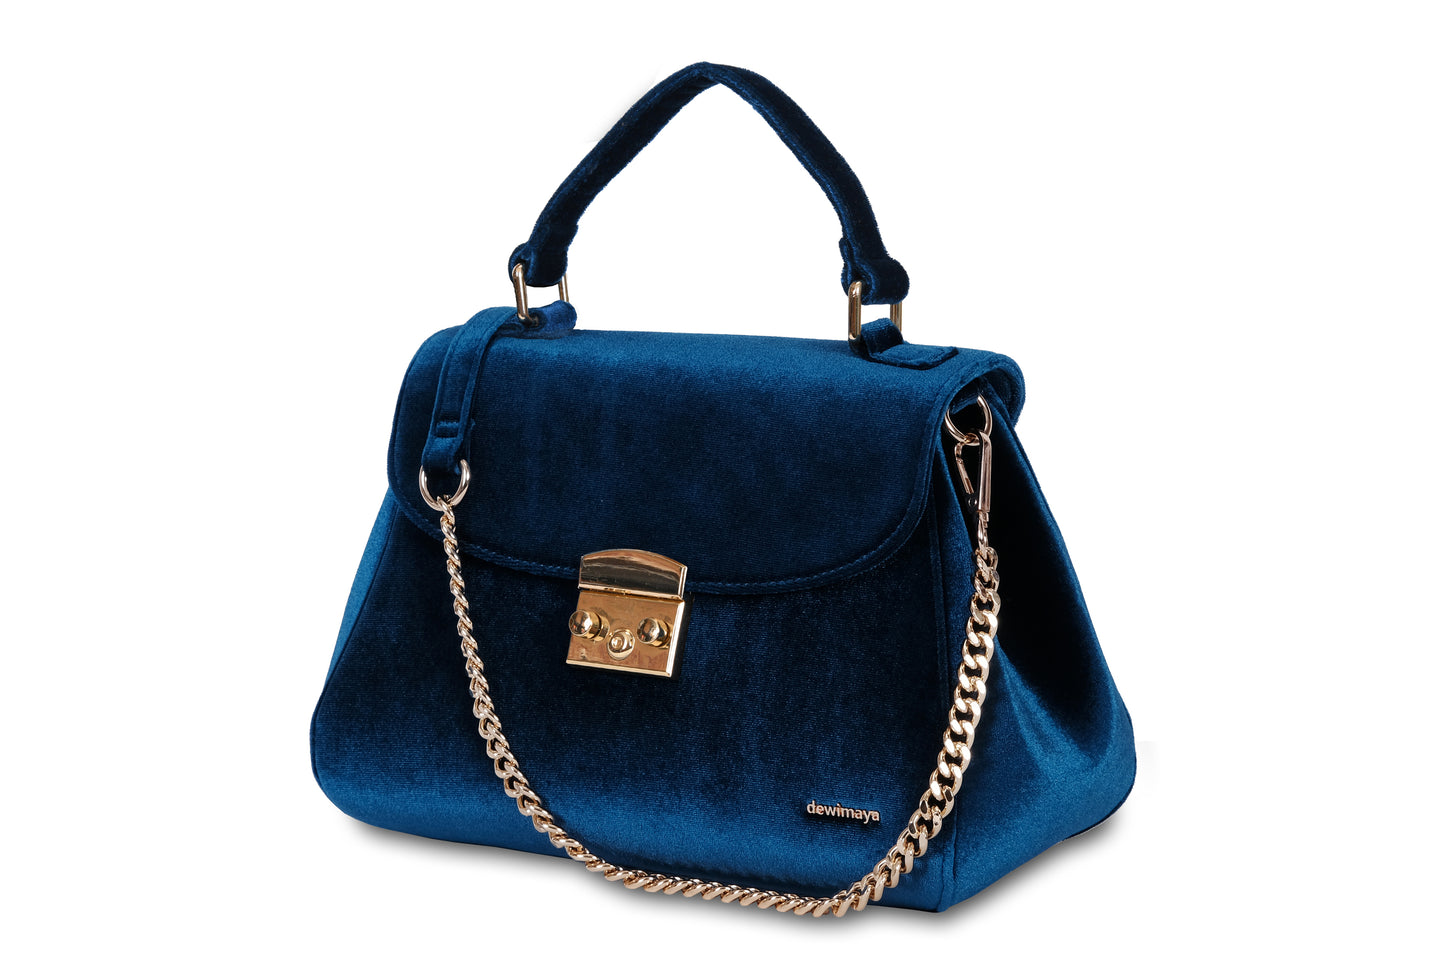 Charlotte Dark Blue Velvet Handbag made by Dewi Maya with gold chain strap available at the best boutique in Upstate South Carolina Spartanburg Greenville Dewi Maya Boutique